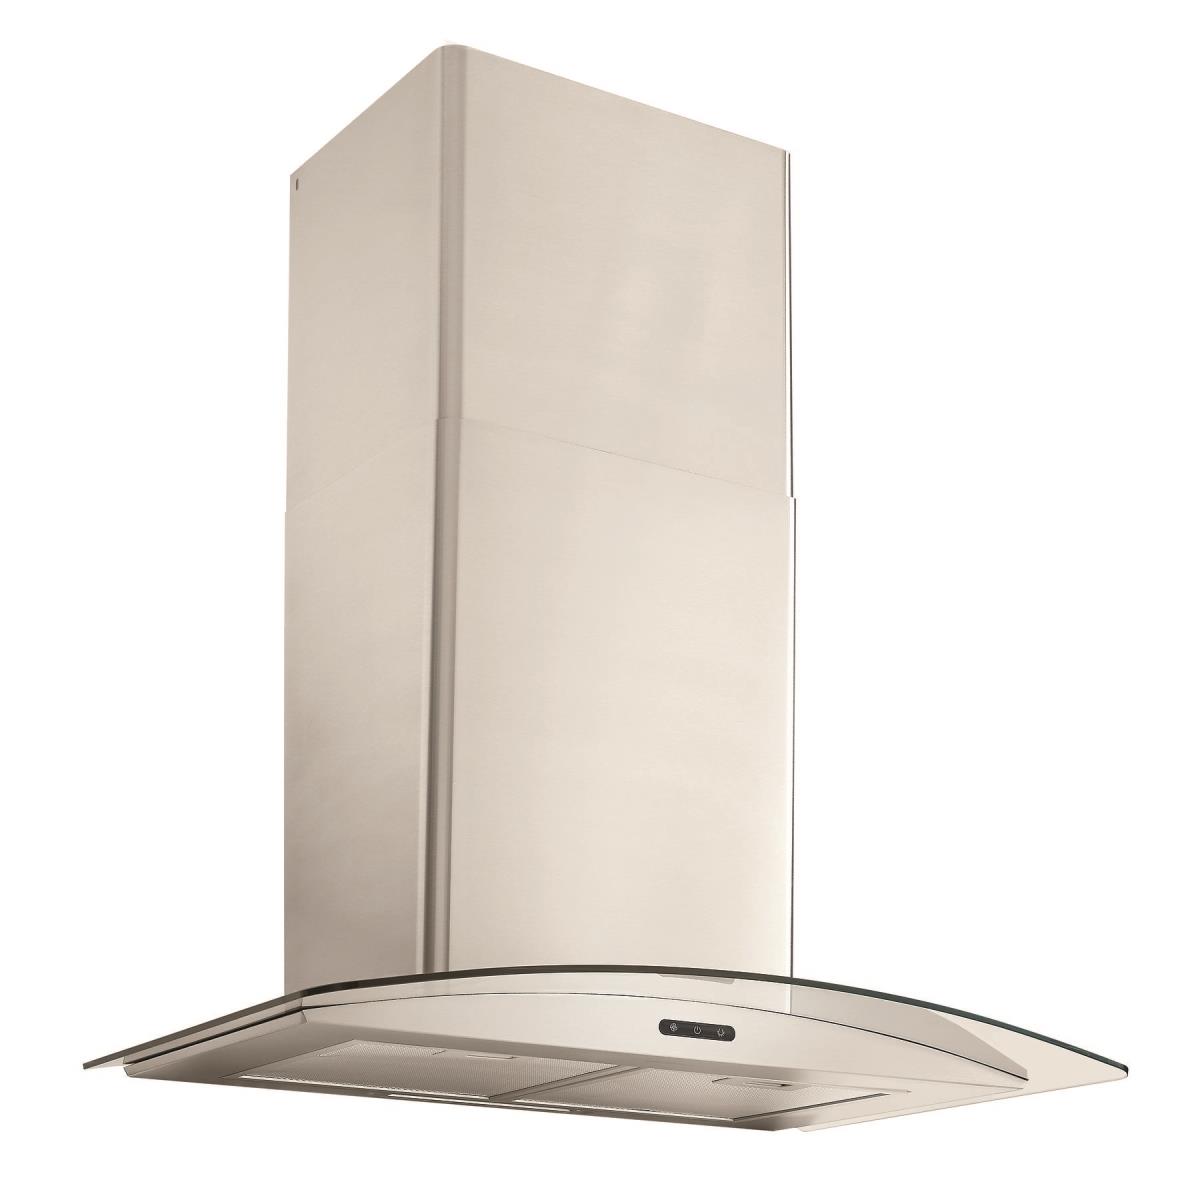 Broan EW4636SS 36 in. Convertible 400 CFM Curved Glass Wall-Mount Chimney Range Hood, Stainless Steel